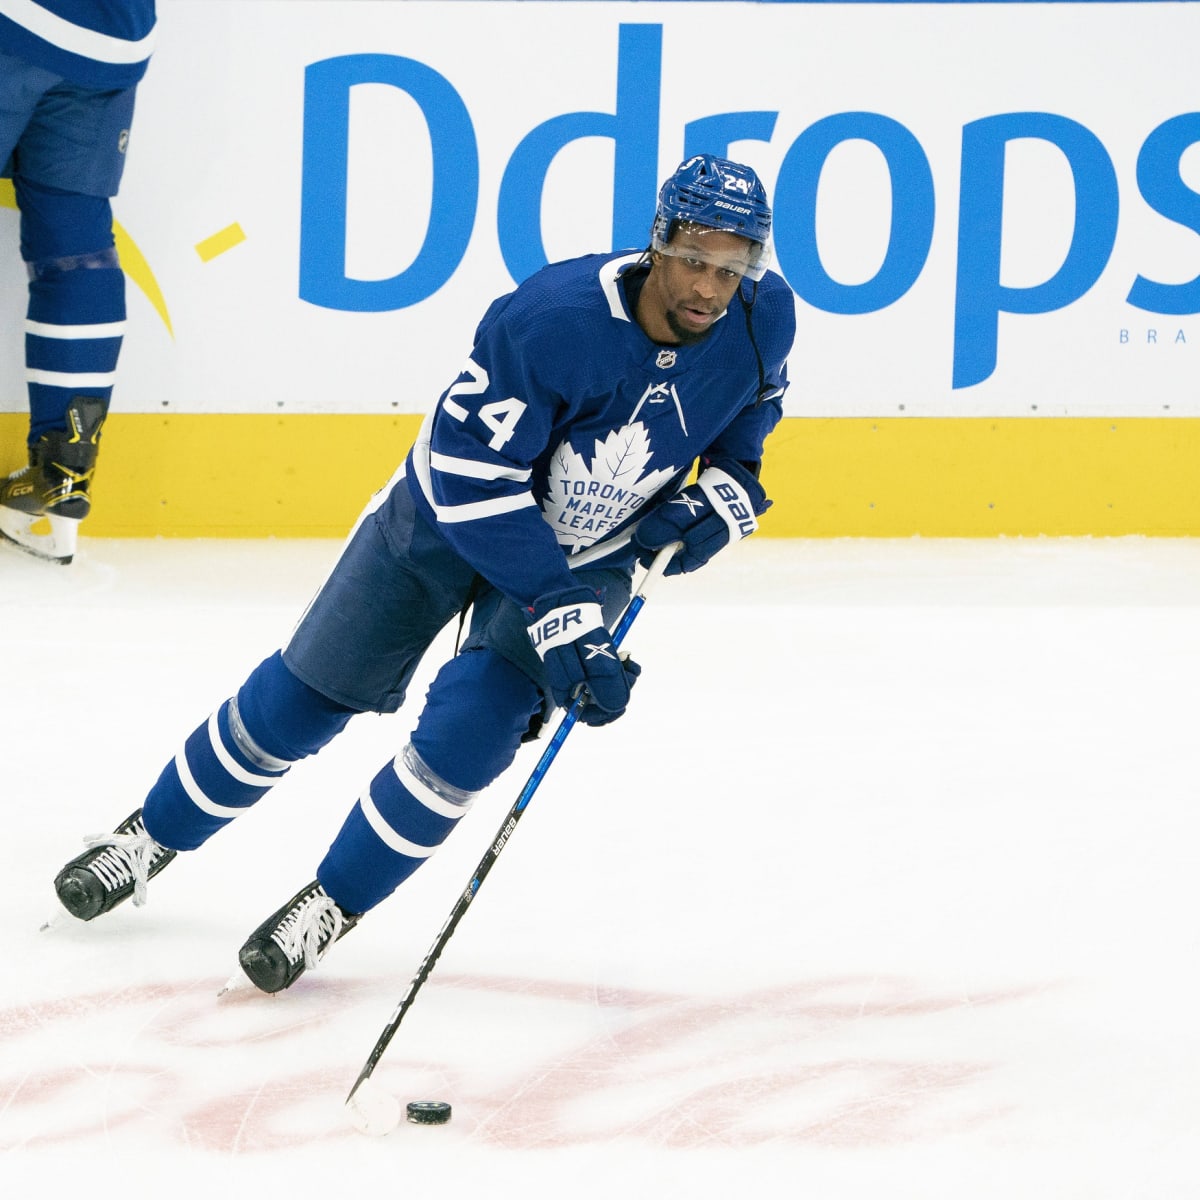 The Toronto Maple Leafs have signed Wayne Simmonds to a two-year